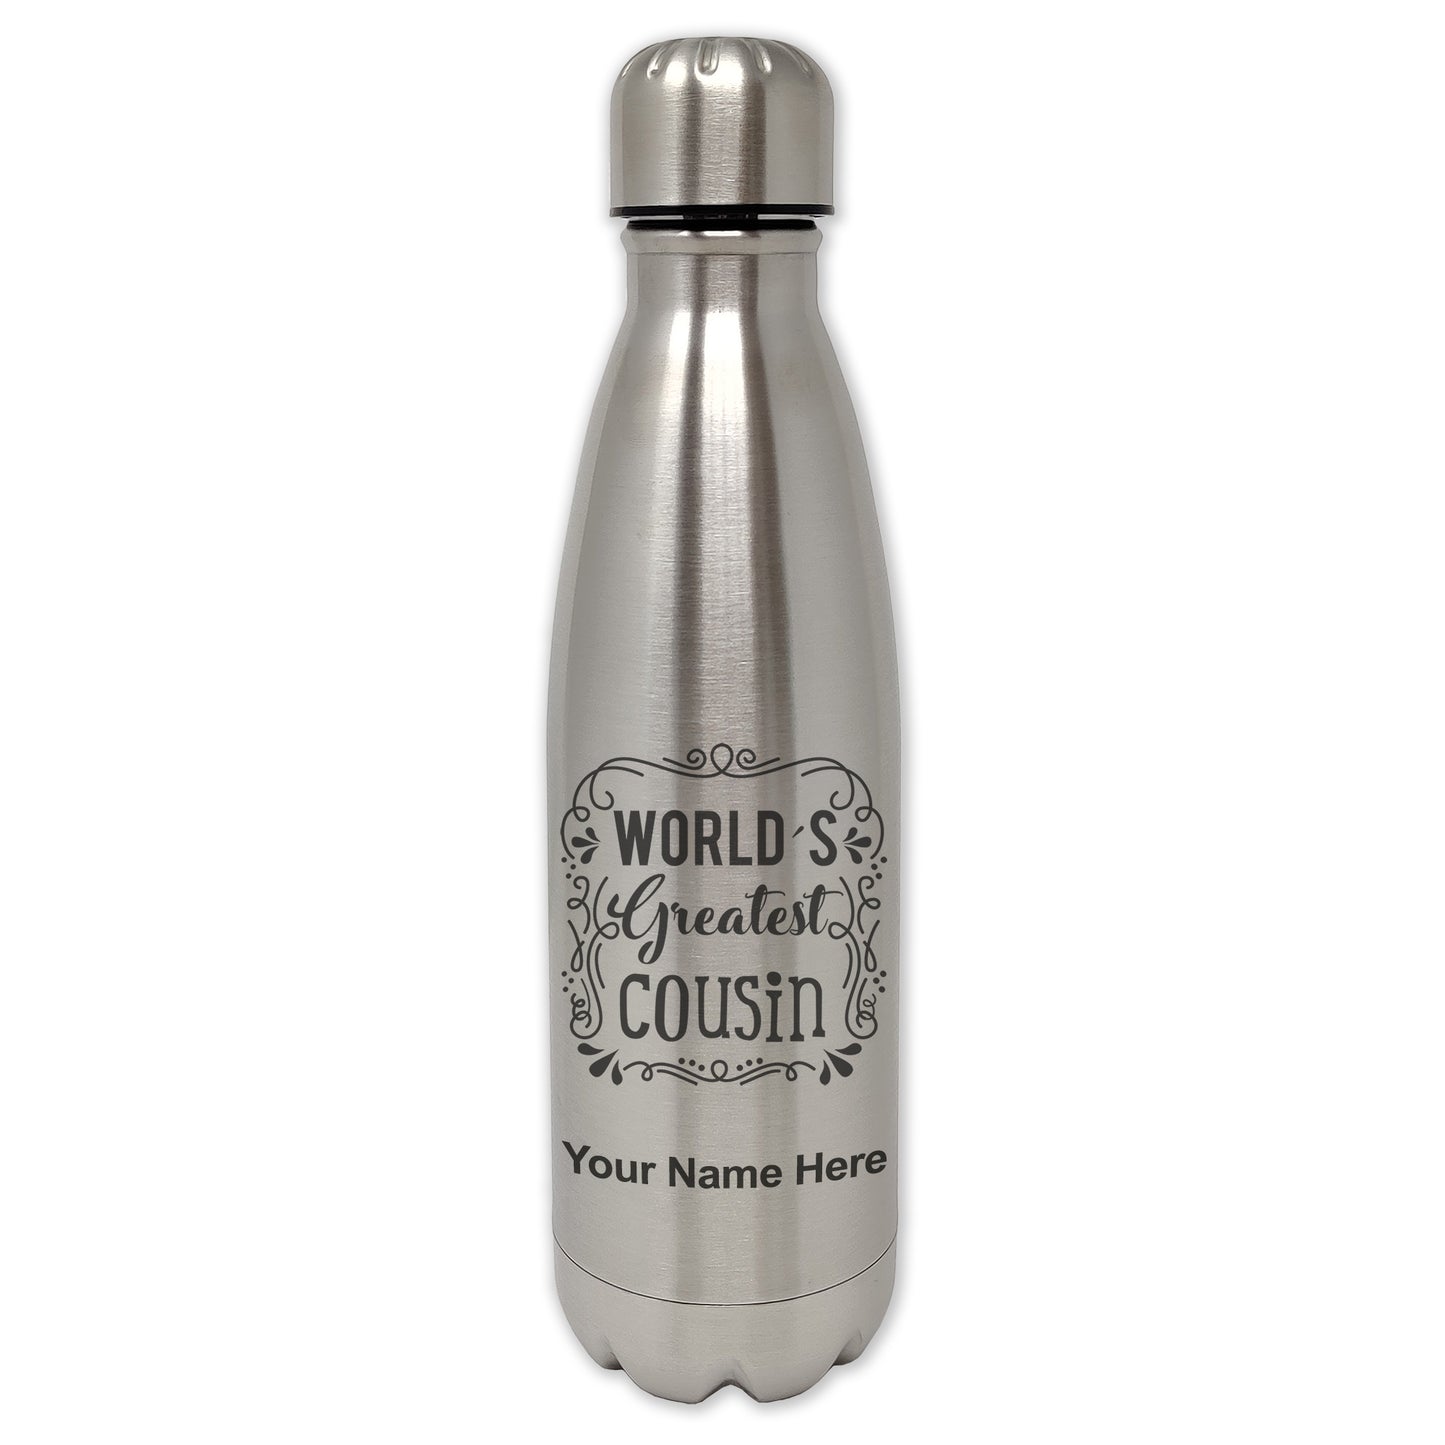 LaserGram Single Wall Water Bottle, World's Greatest Cousin, Personalized Engraving Included